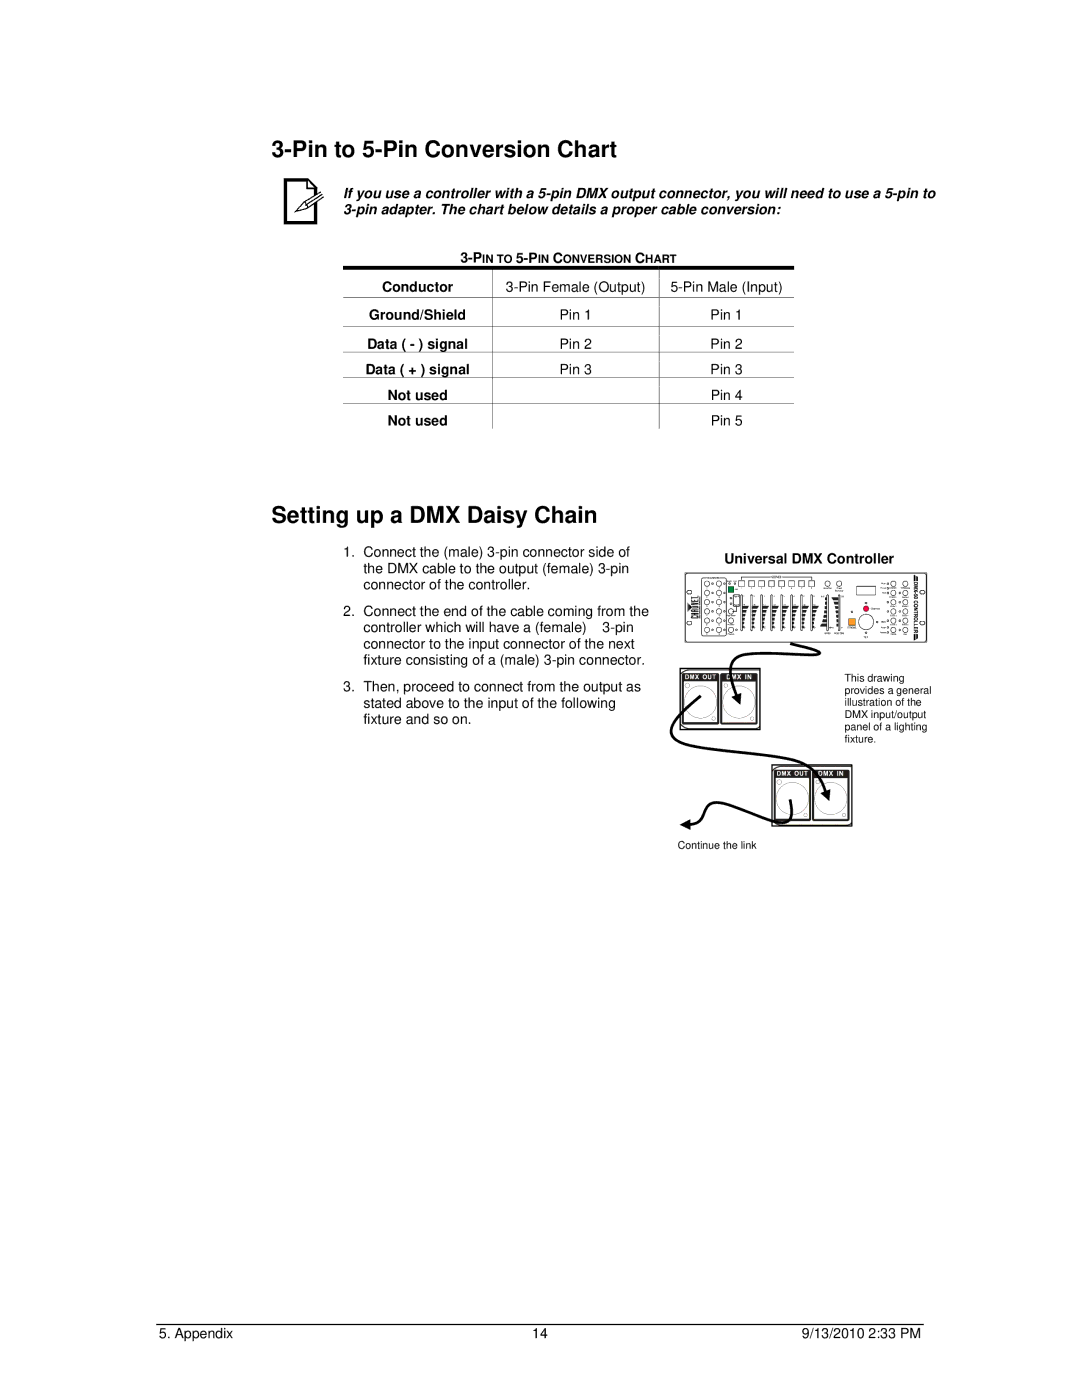 Chauvet 56-24UVB user manual Pin to 5-Pin Conversion Chart, Setting up a DMX Daisy Chain 